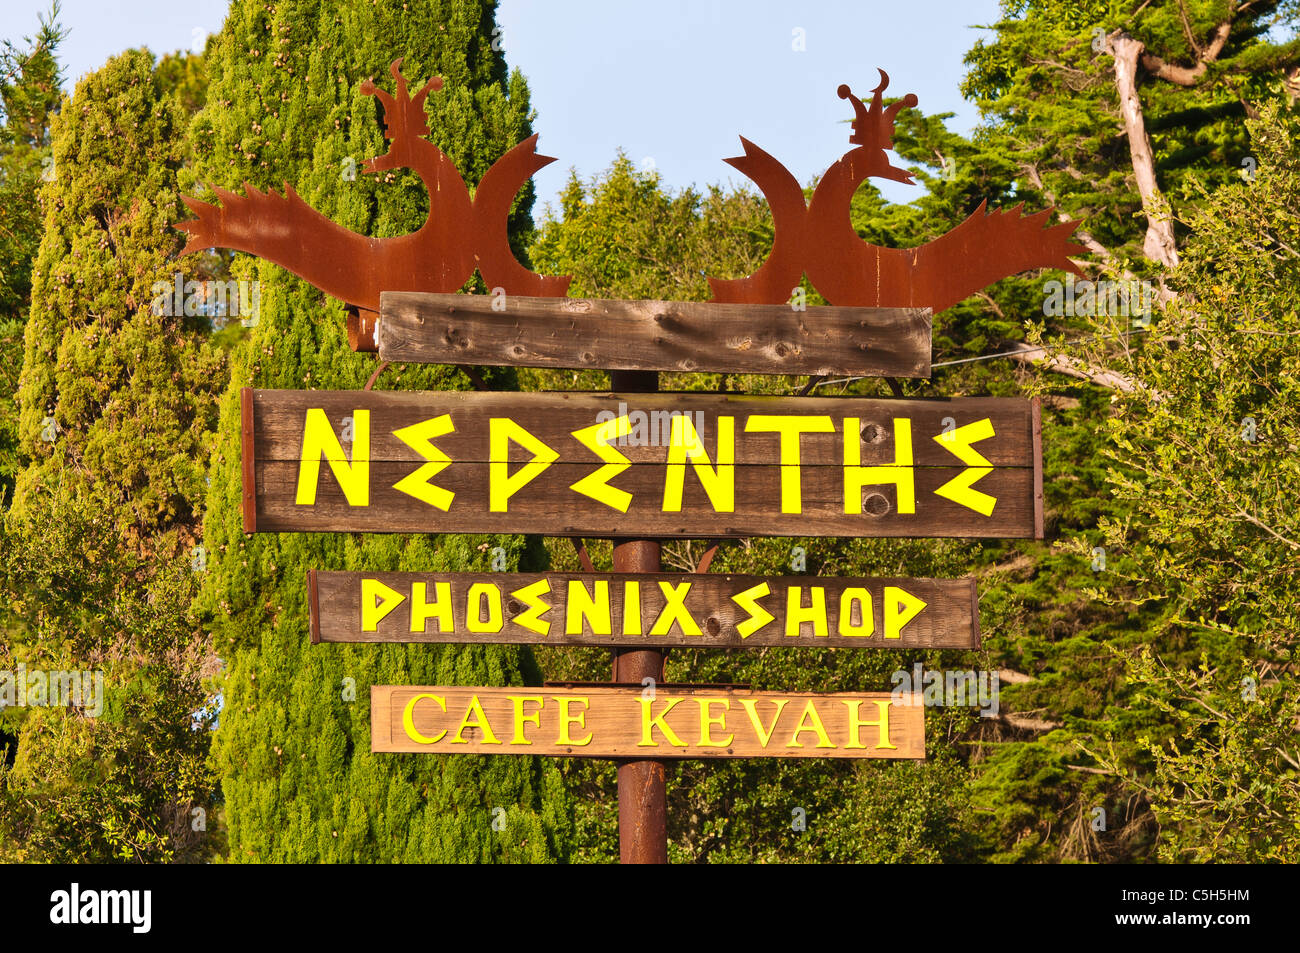 Nepenthe Restaurant and store, Big Sur, California Stock Photo